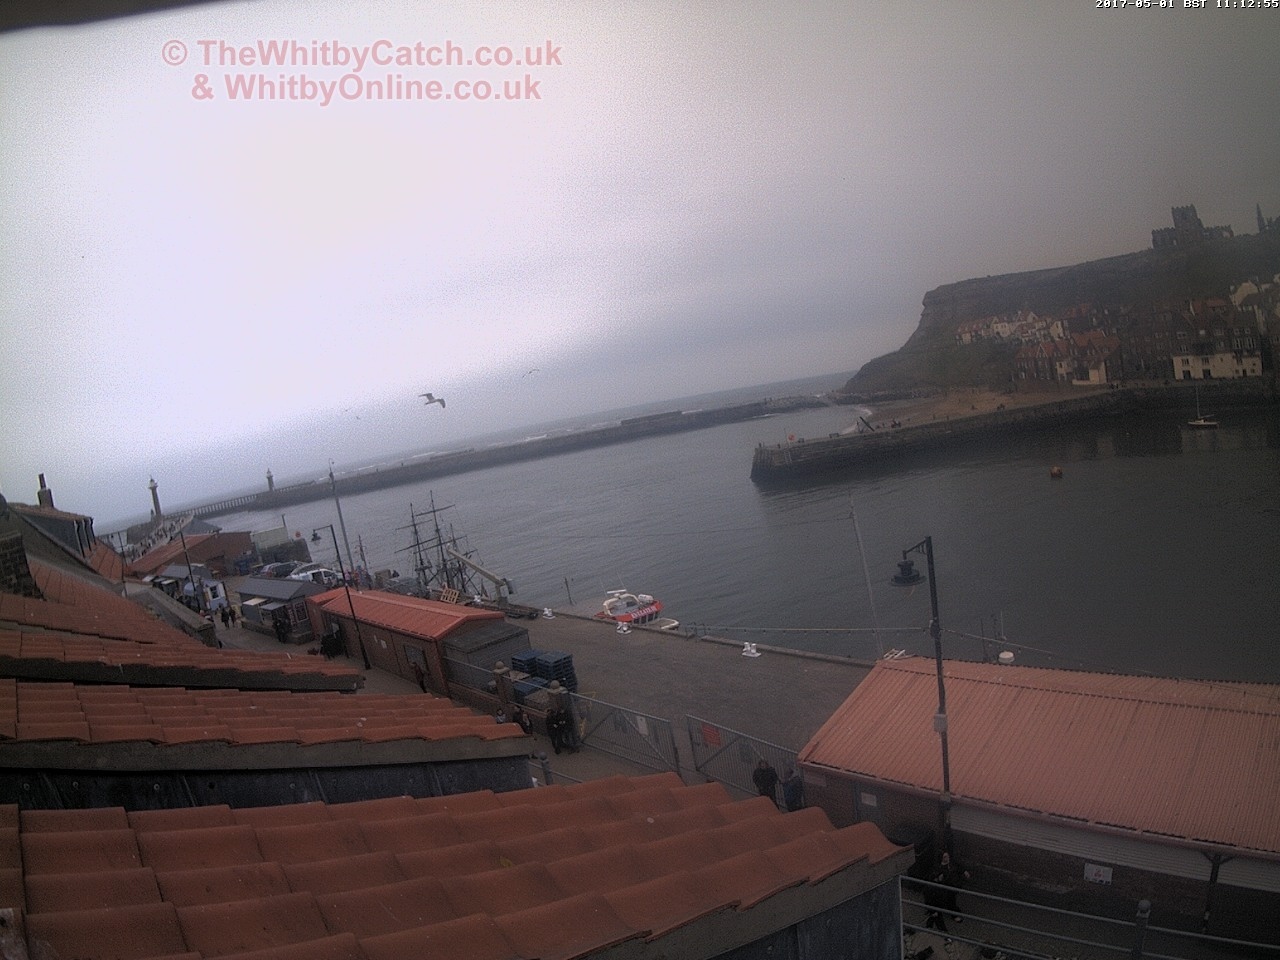 Whitby Mon 1st May 2017 11:13.